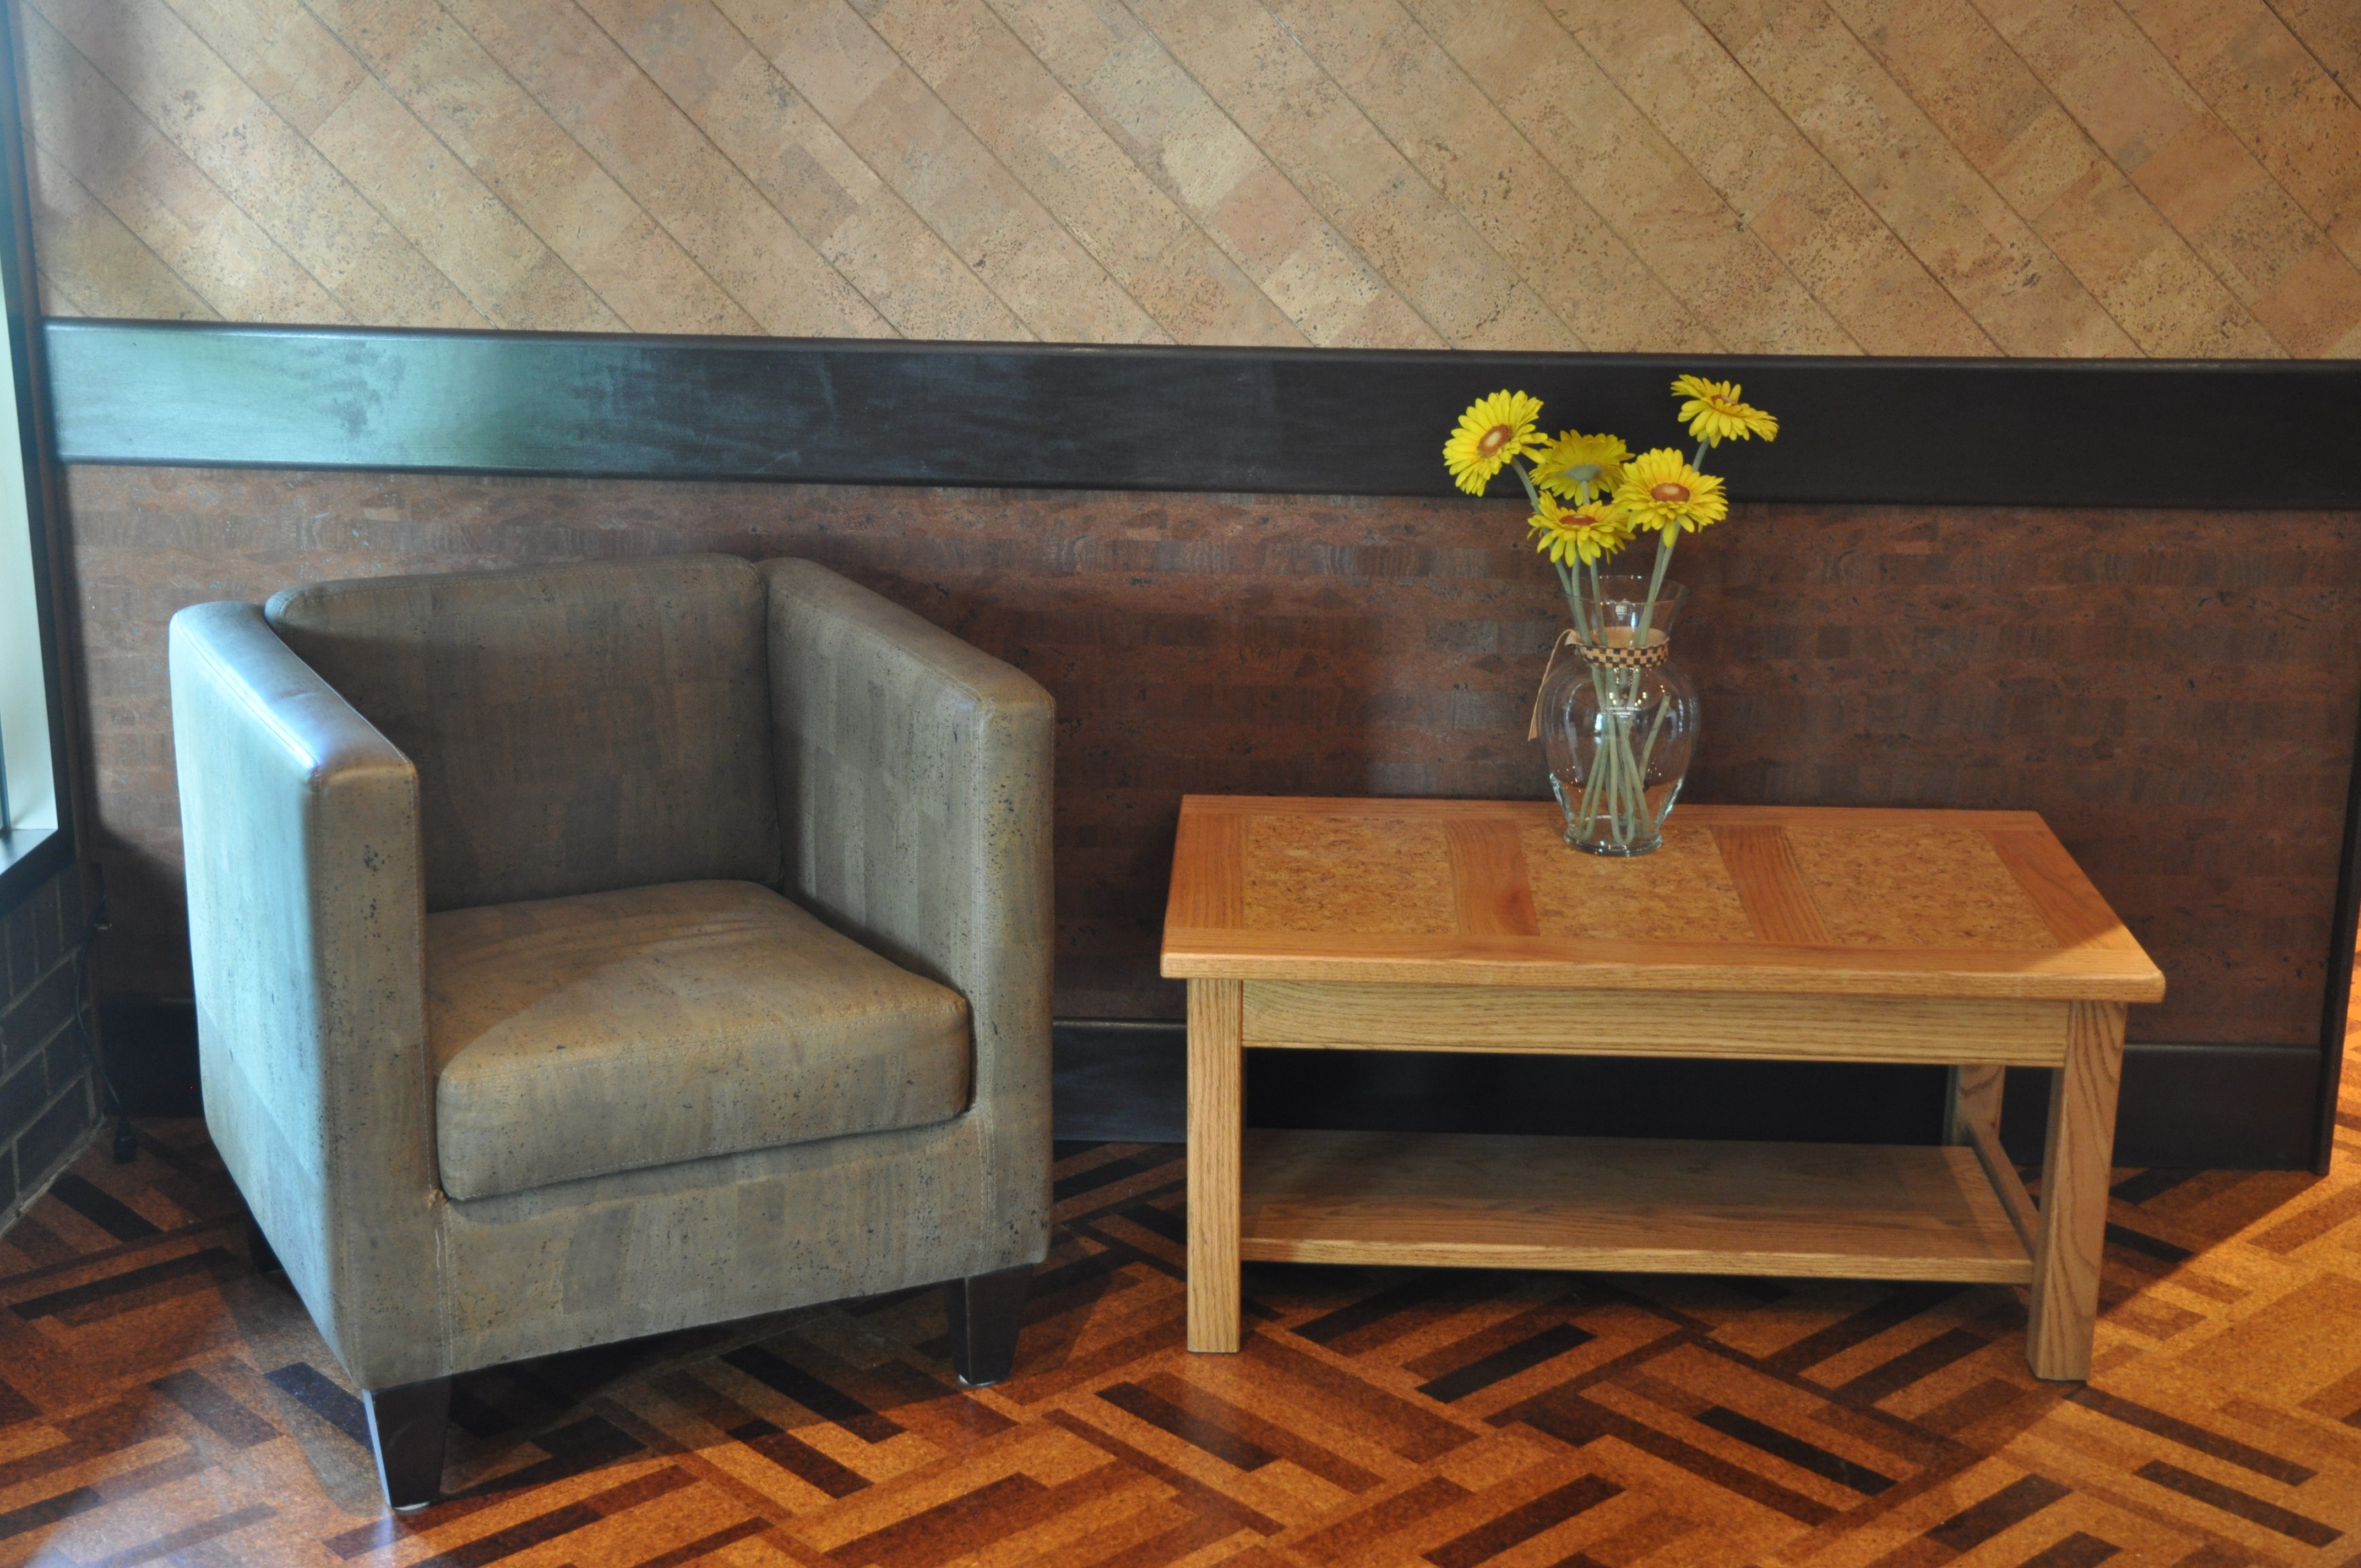 Cork Flooring and Wall Tiles